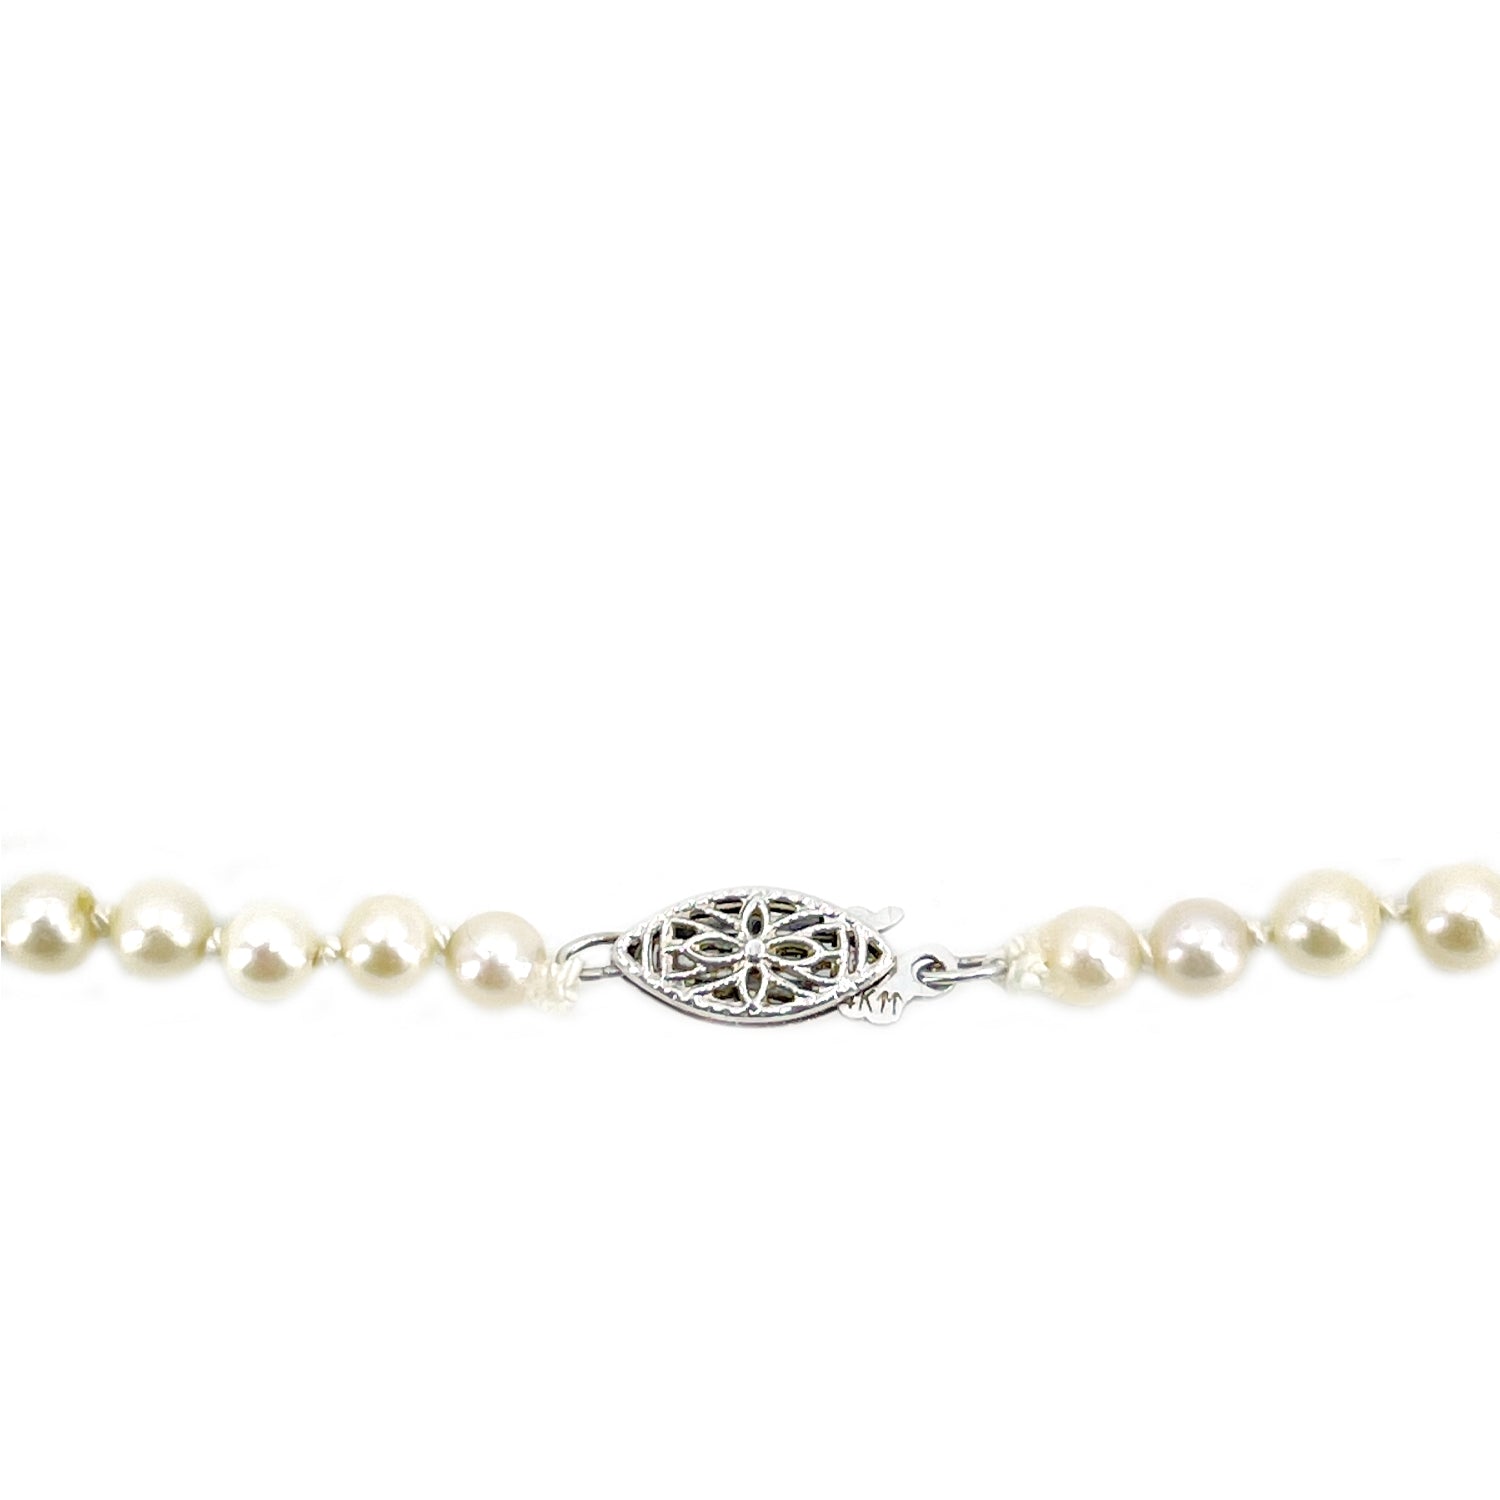 Vintage Filigree Mid-Century Cultured Akoya Pearl Necklace Strand - 14K White Gold 20.75 Inch